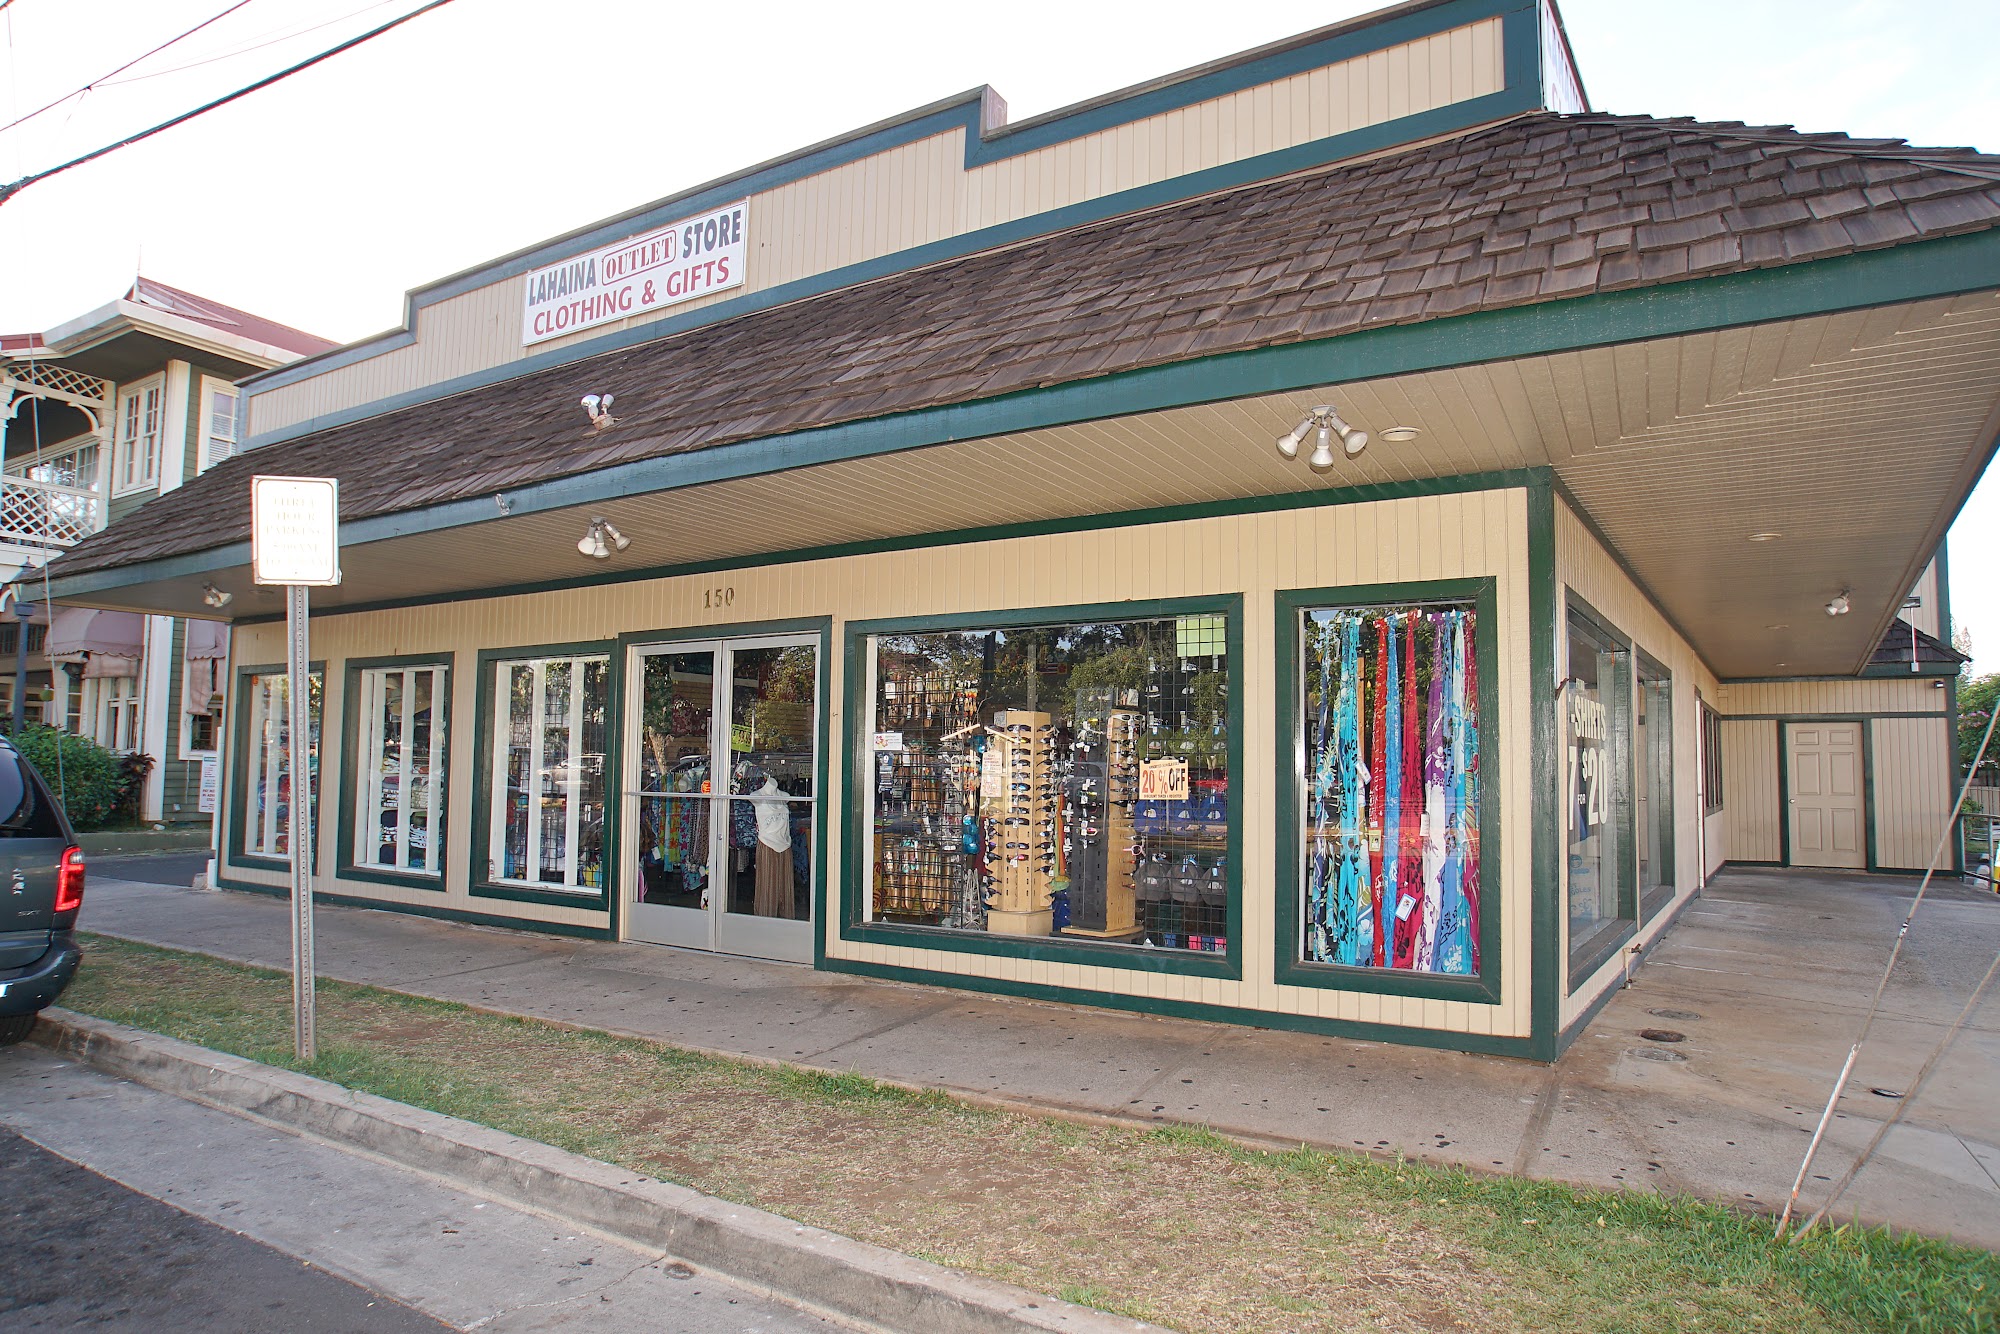 Lahaina Outlet Store